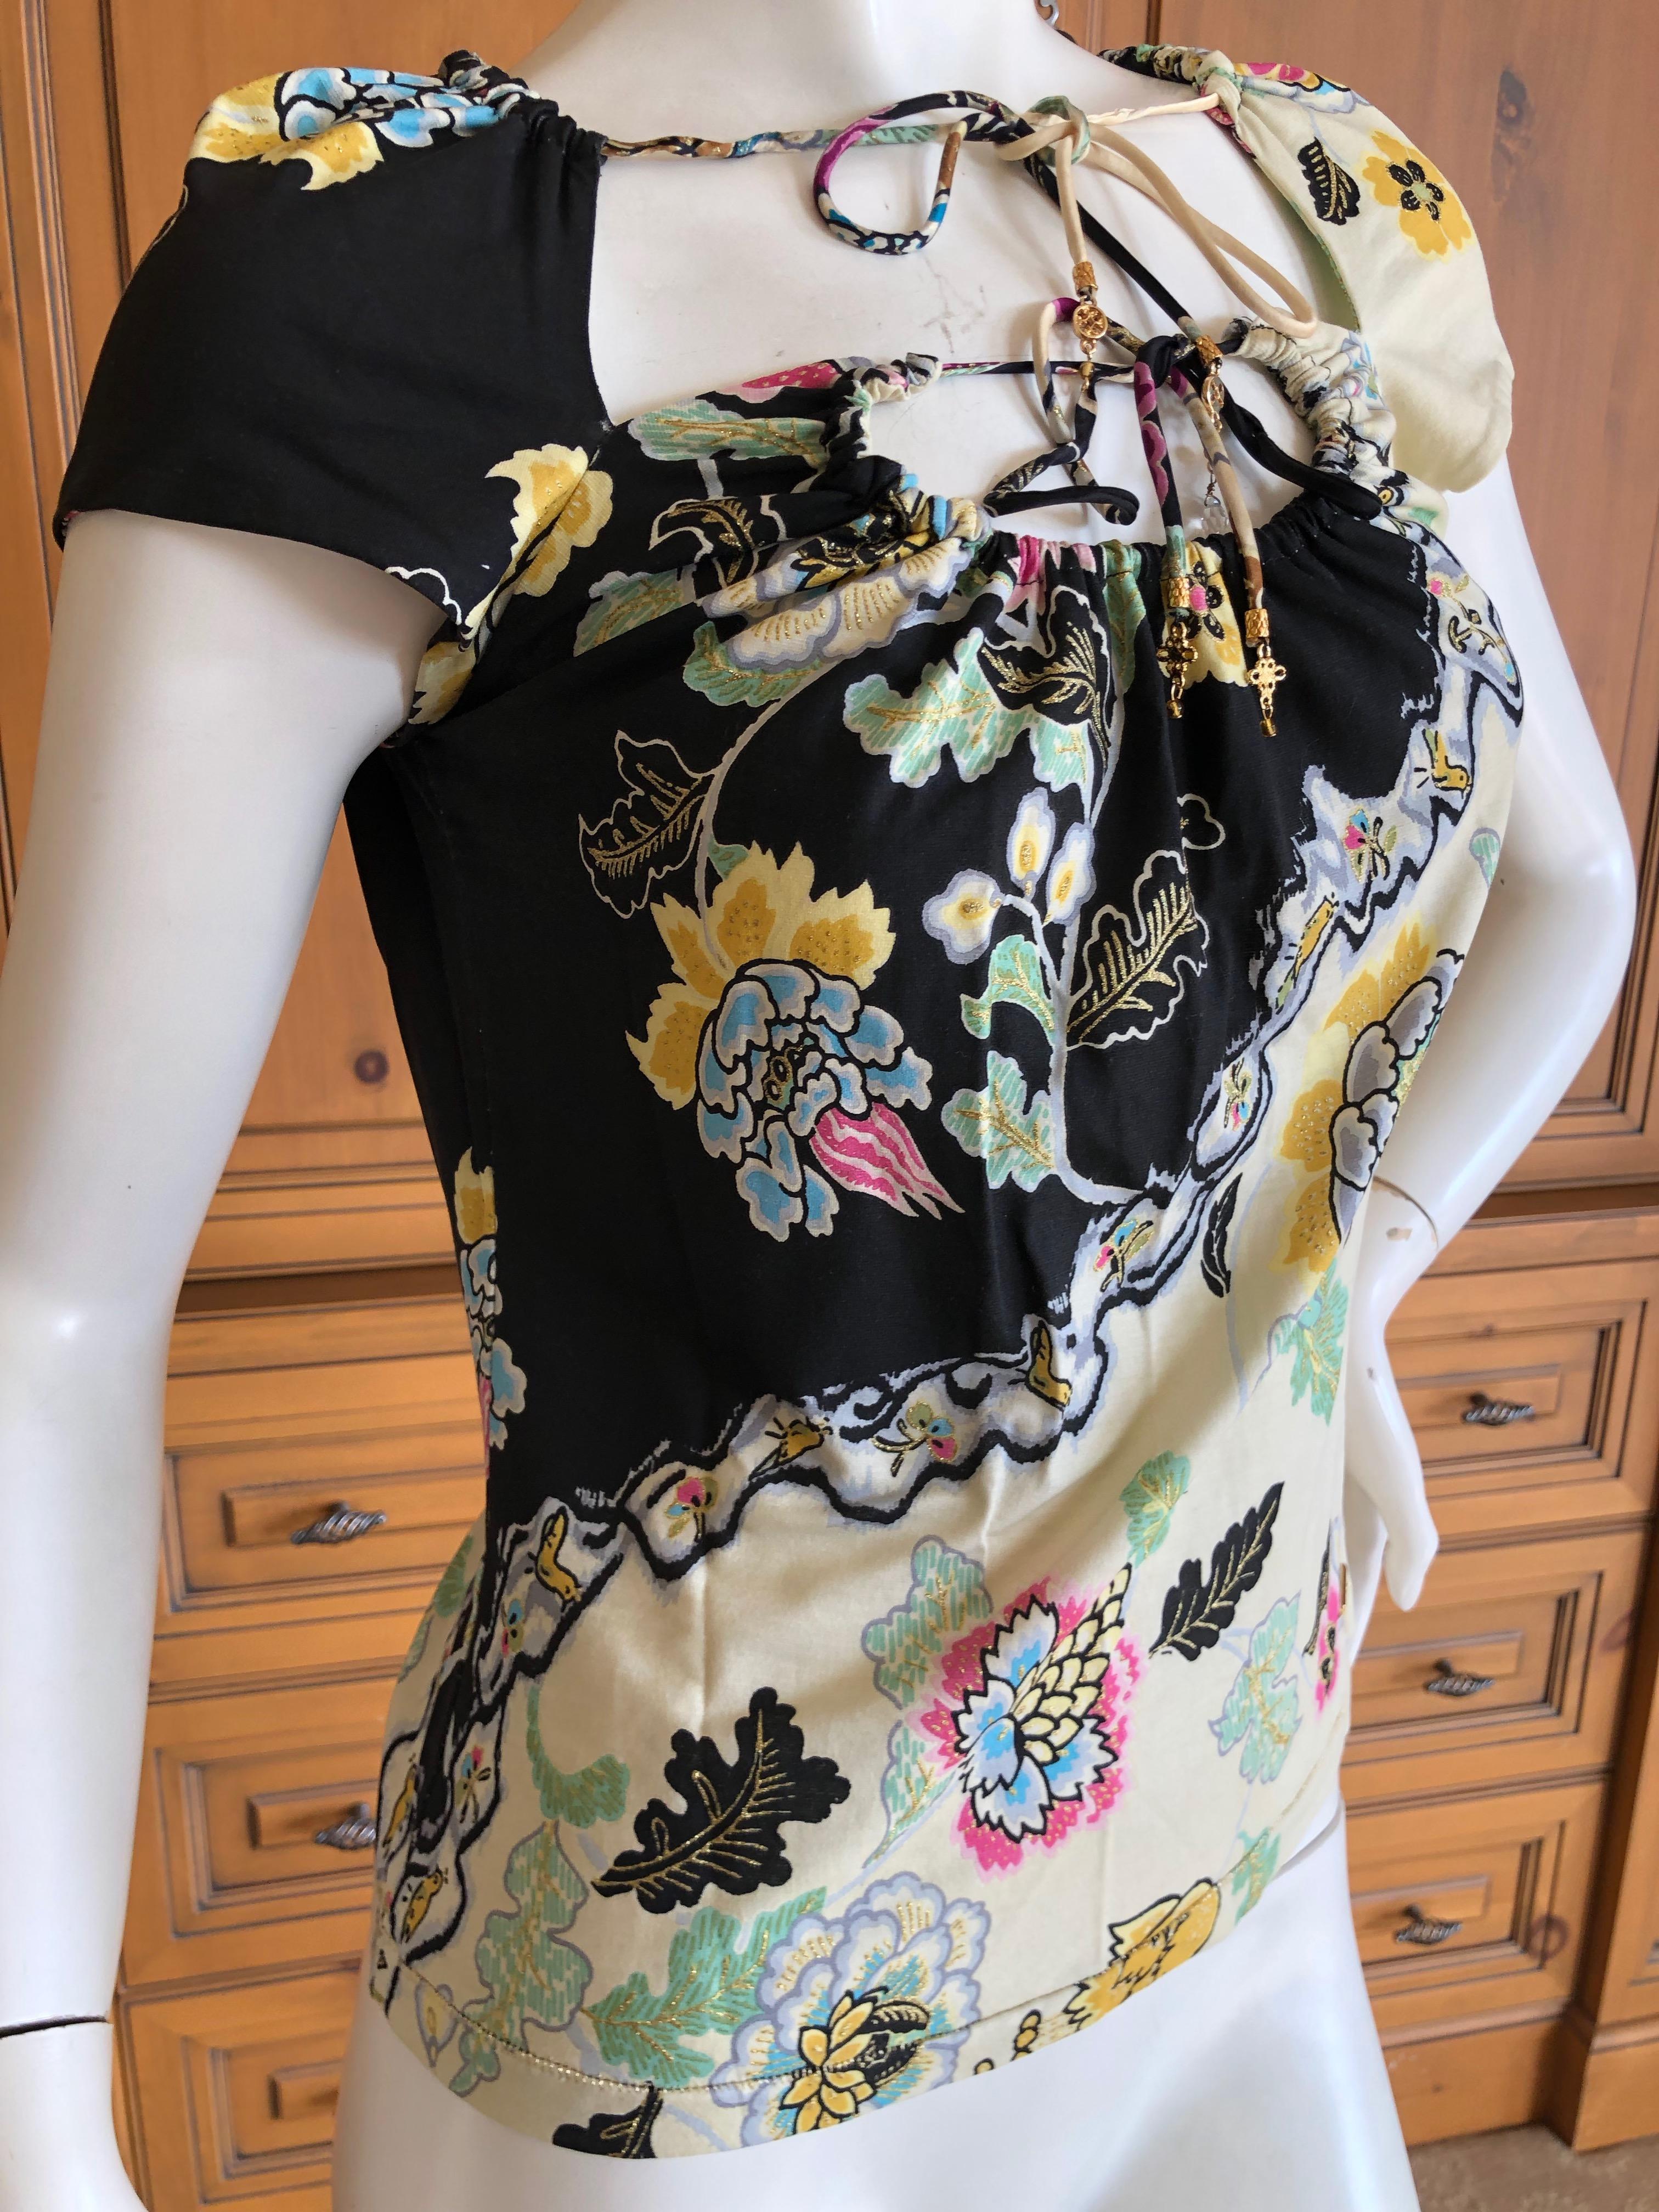 Roberto Cavalli Spring 2003 Silk Cheongsam Style Floral Top Size Large
Size Large
Bust 36